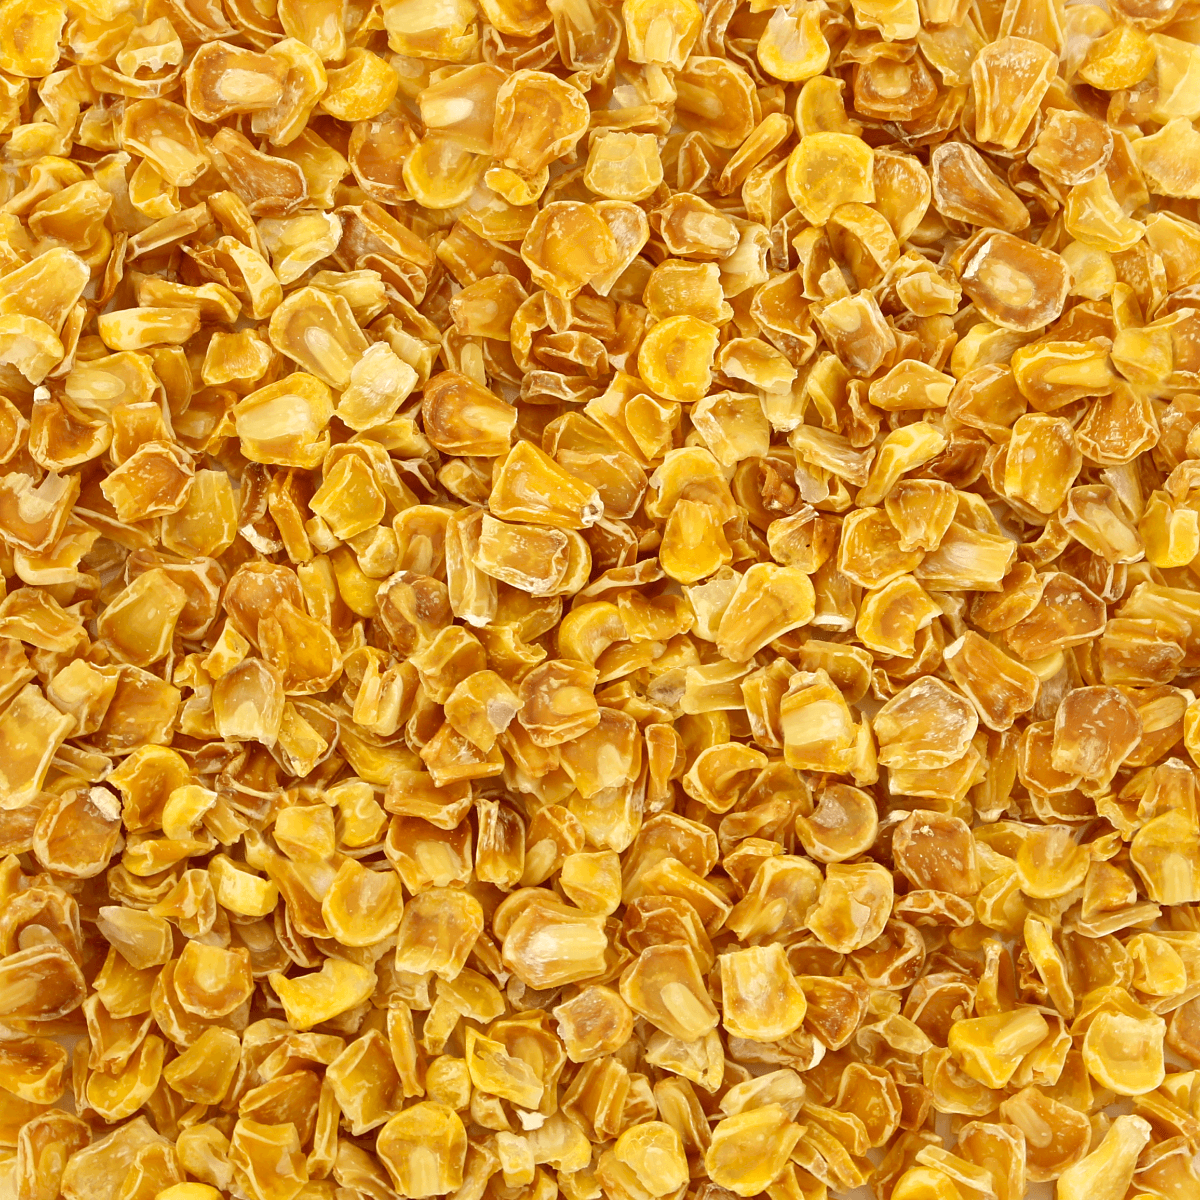 A close up of a pile of yellow corn from Harmony House Dried Corn (12 oz).